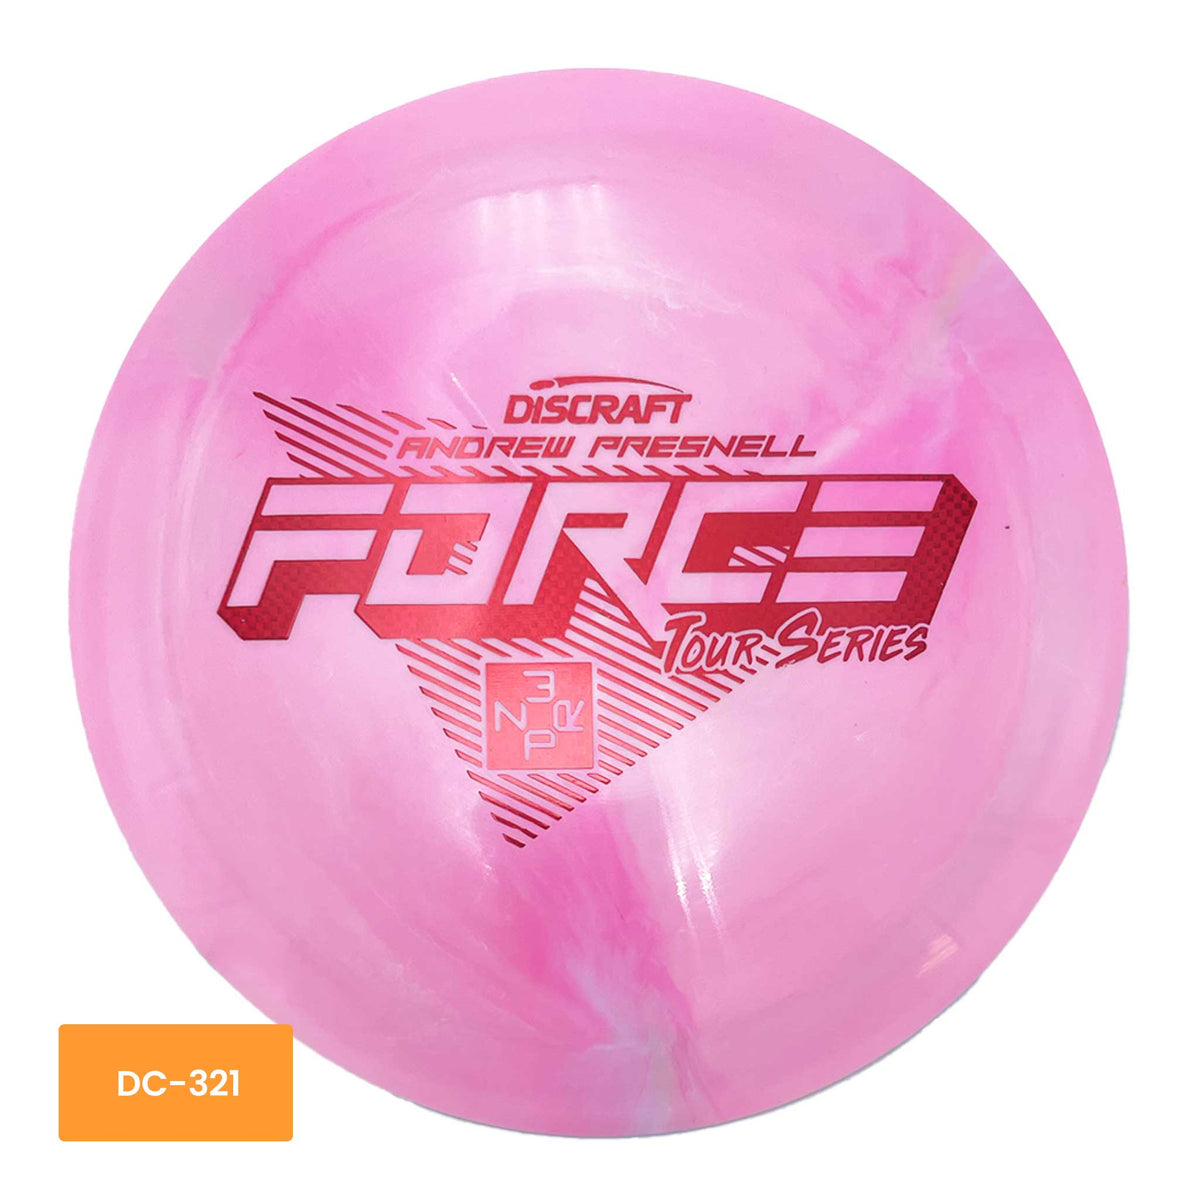 Discraft 2022 Andrew Presnell Tour Series Force distance driver - Pink